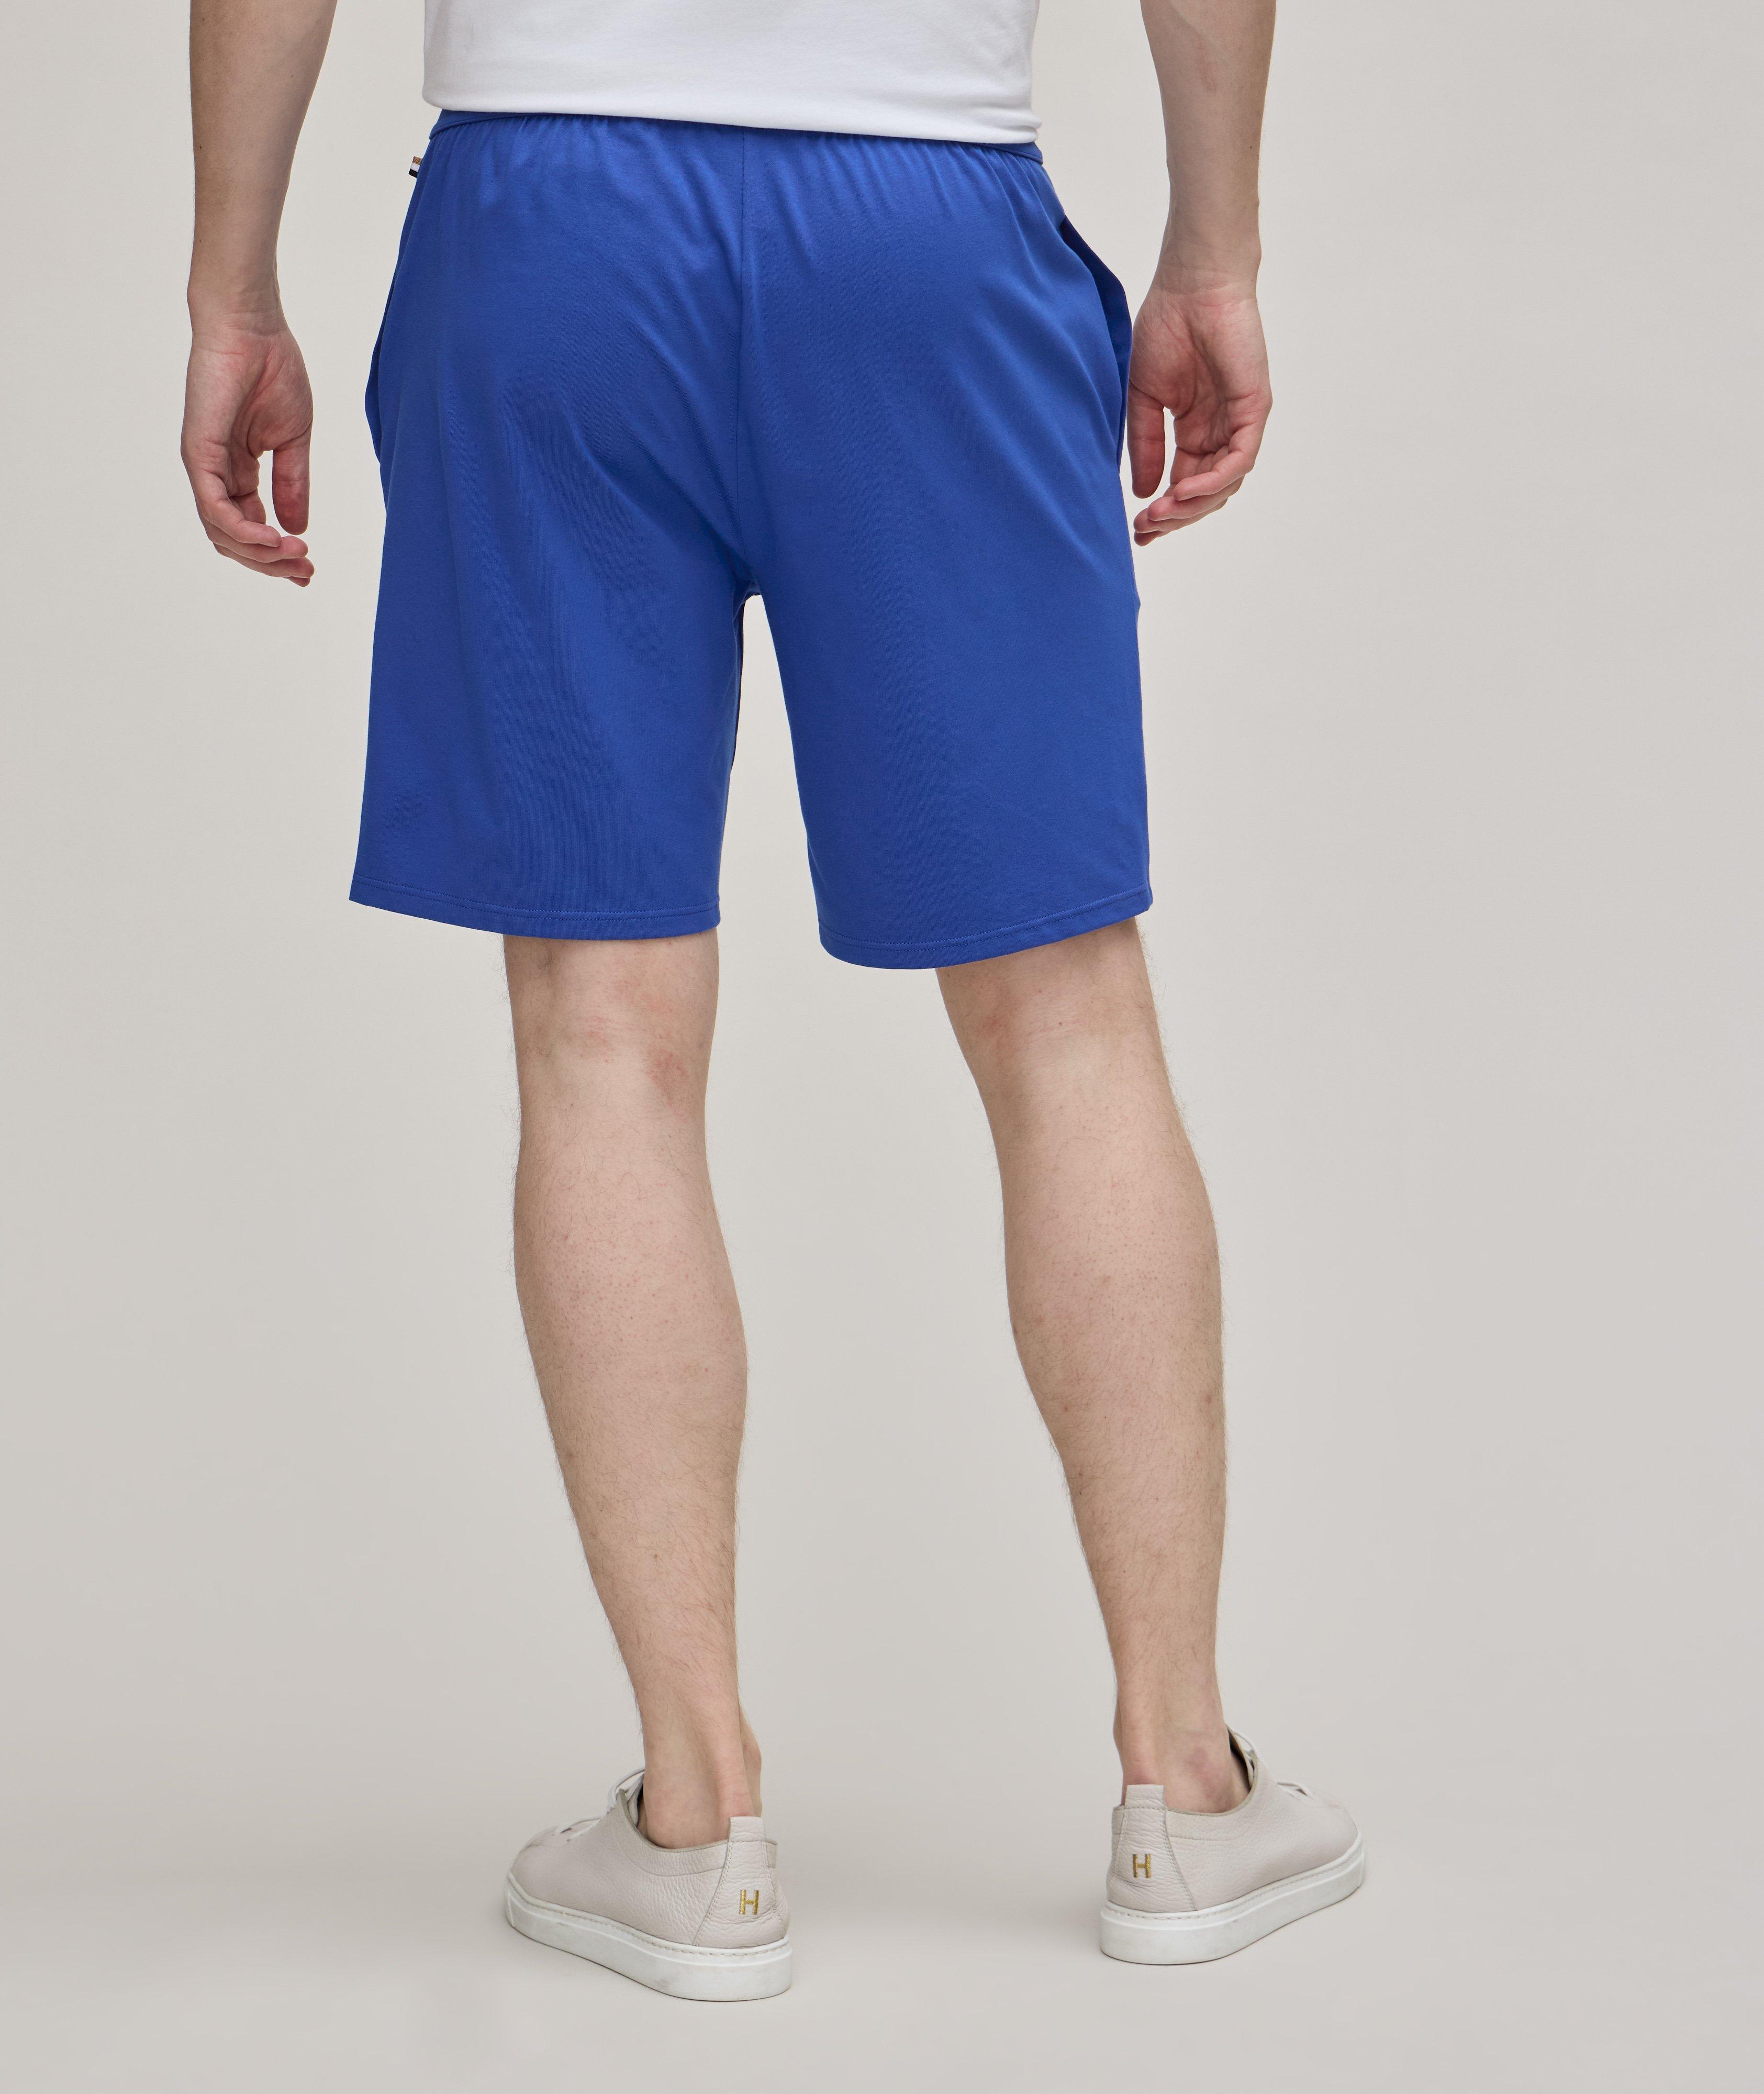 Homewear Collection Stretch-Cotton Sleep Shorts image 2